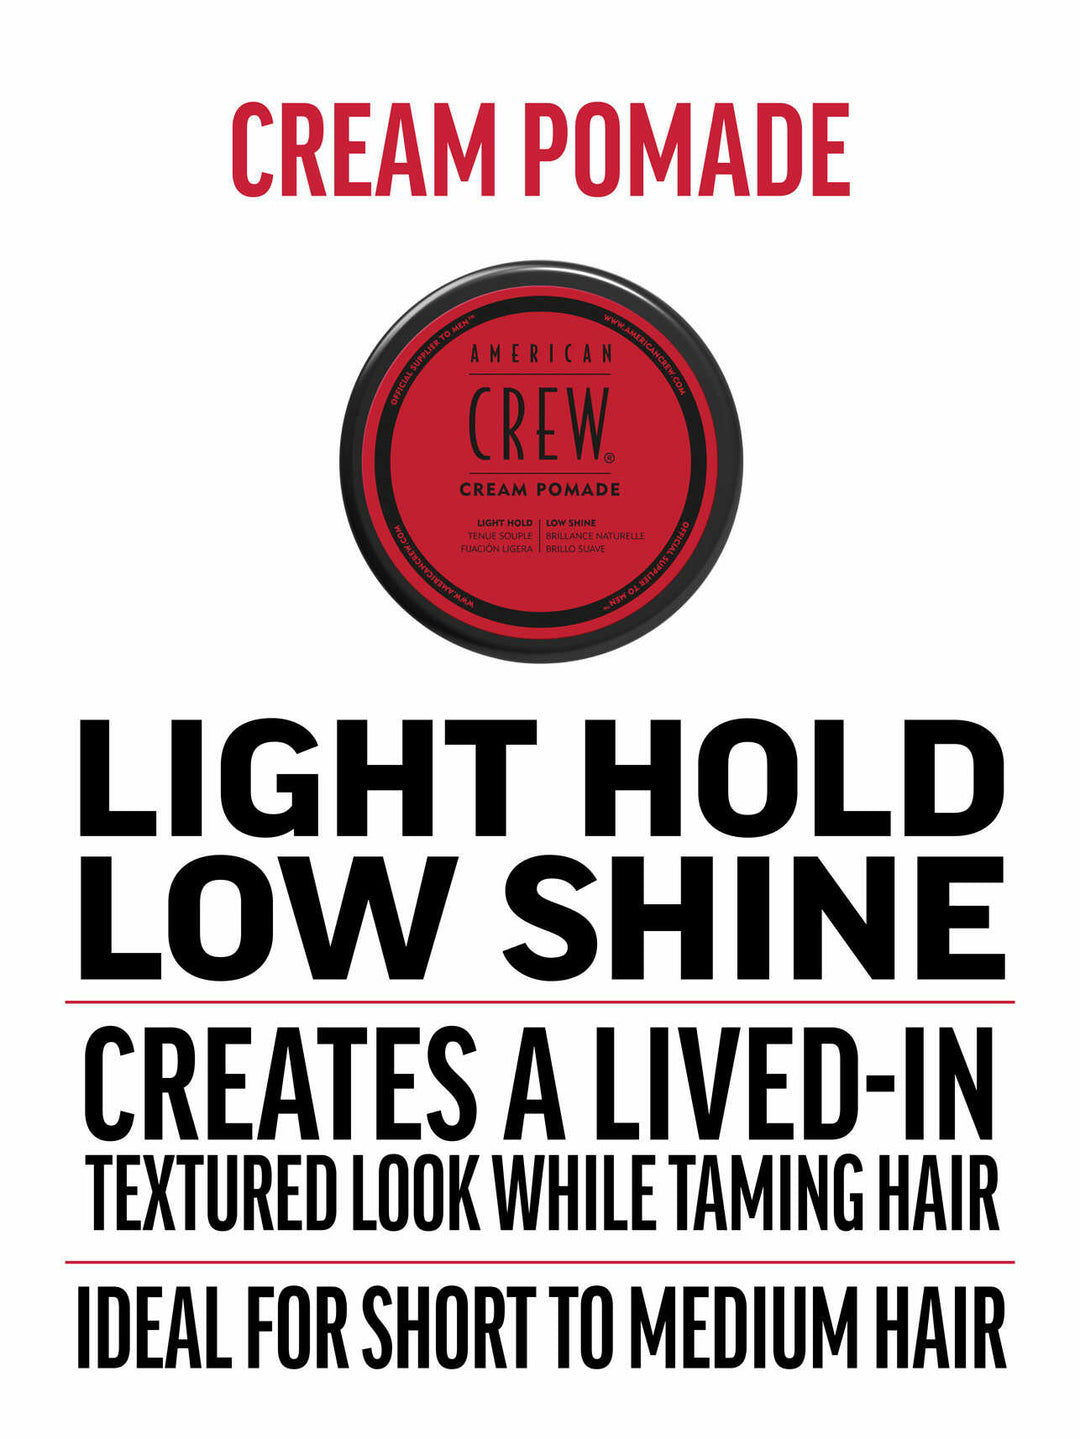 Cream Pomade is moisturizing and conditioning, tames hair for a natural look and provides textured definition